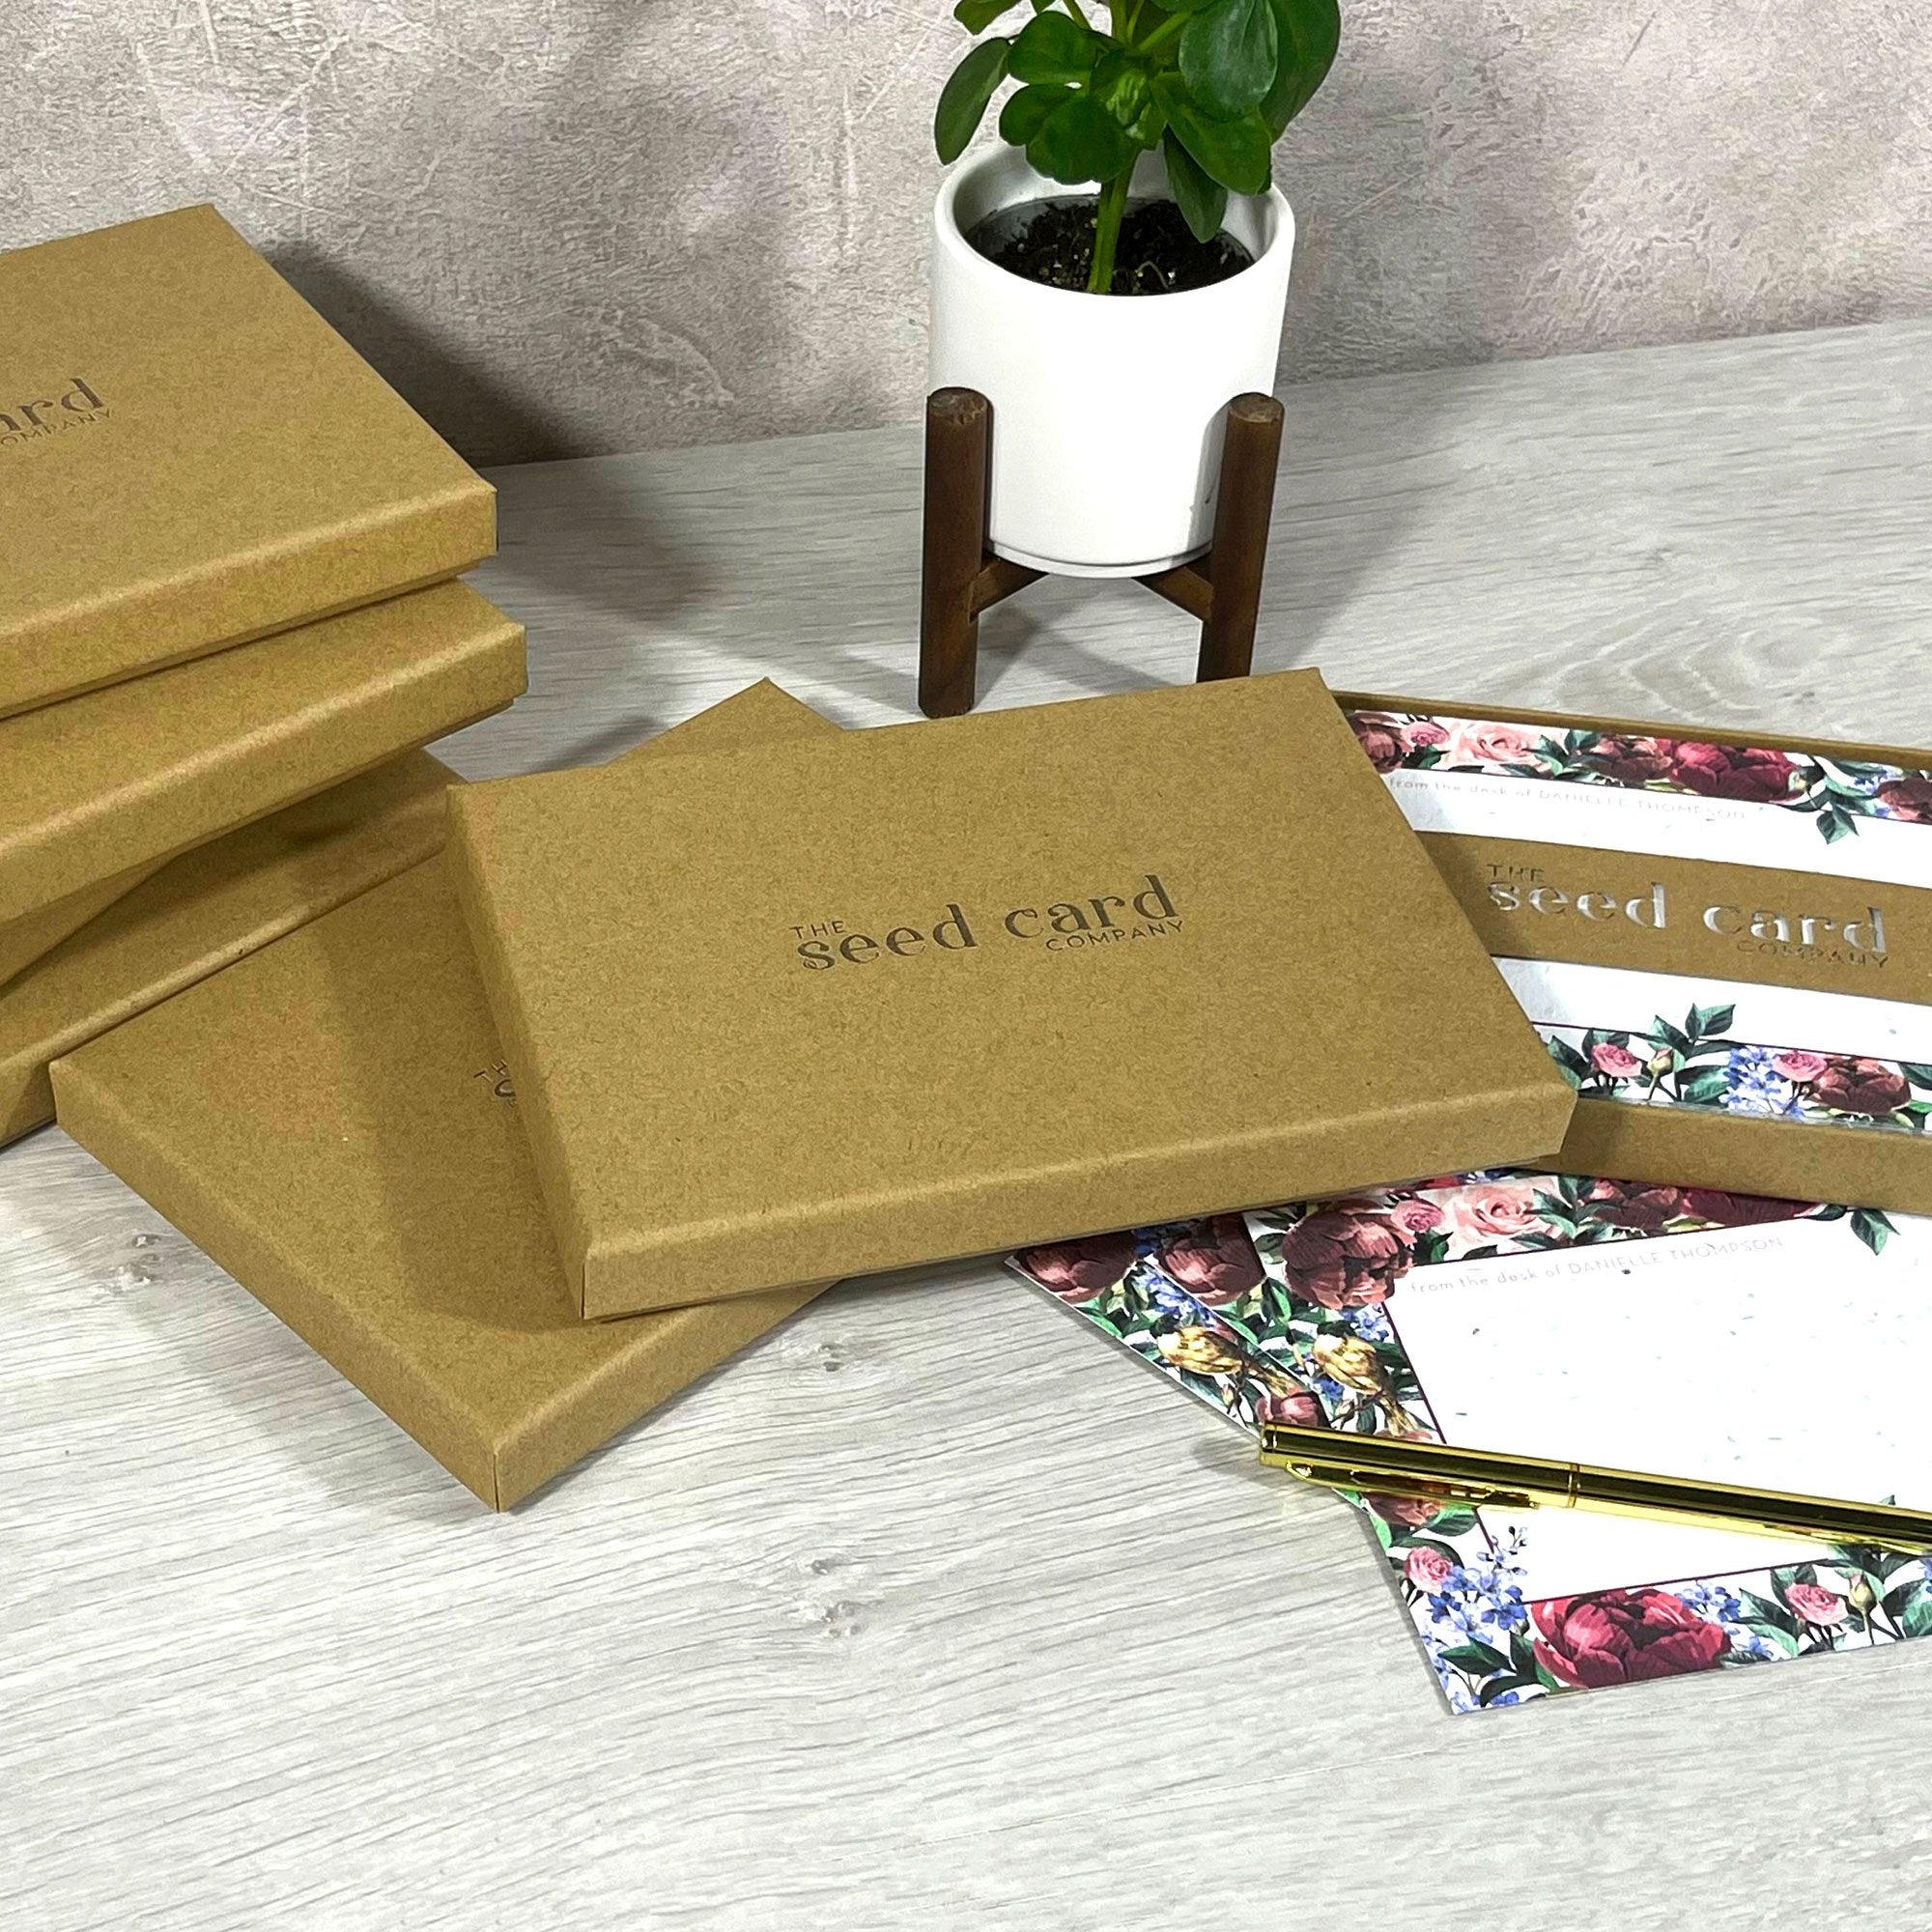 Shop online Greenery Goodness - 100% biodegradable seed-embedded cards Shop -The Seed Card Company